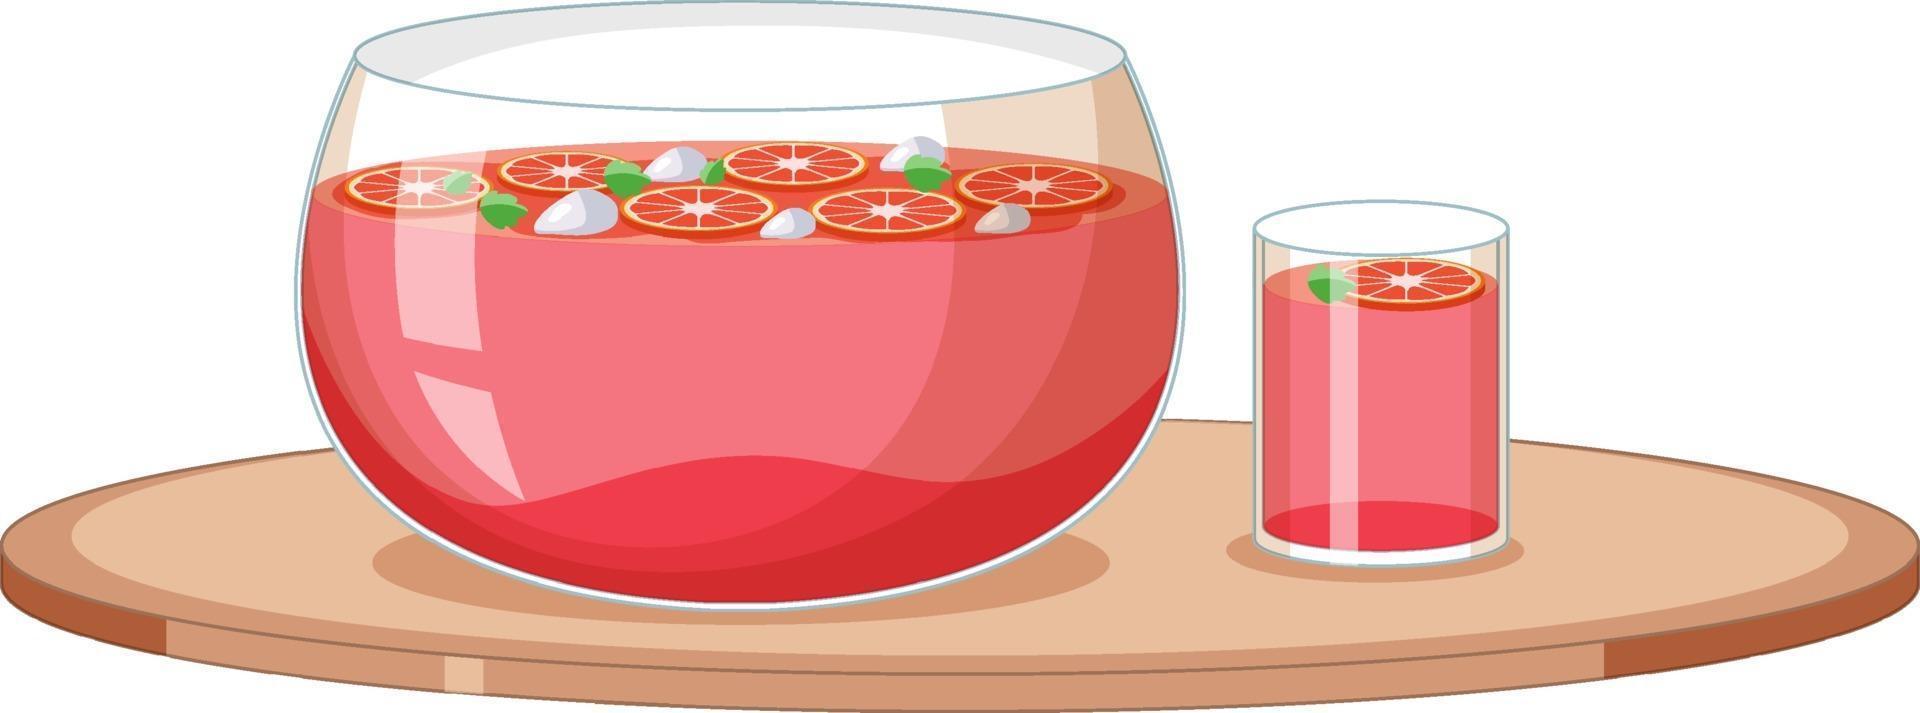 Mocktails fruit drink on the table on white background vector